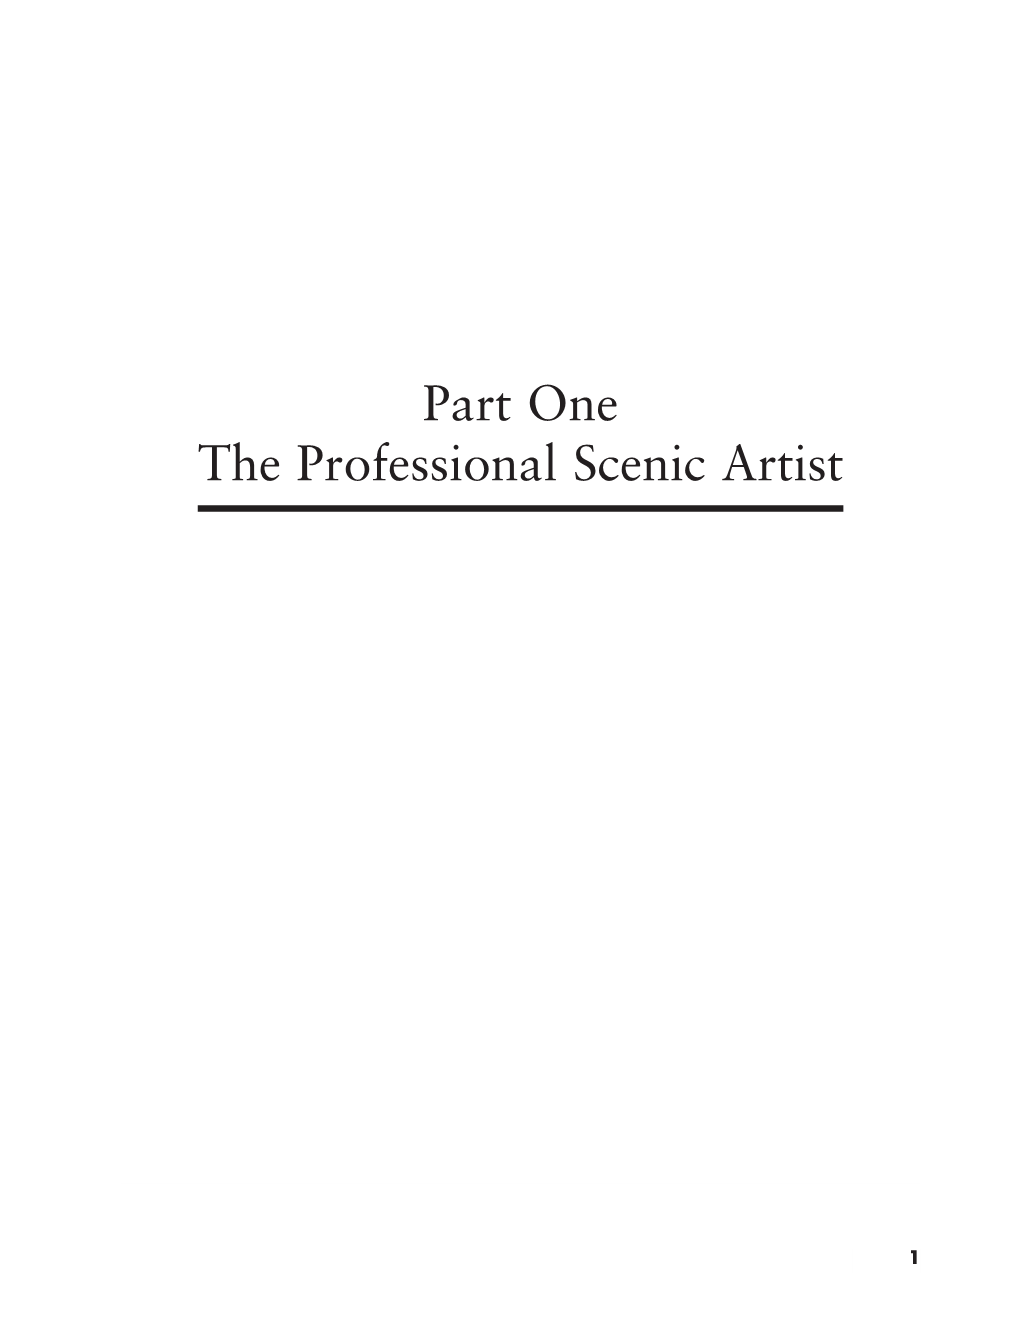 Part One the Professional Scenic Artist